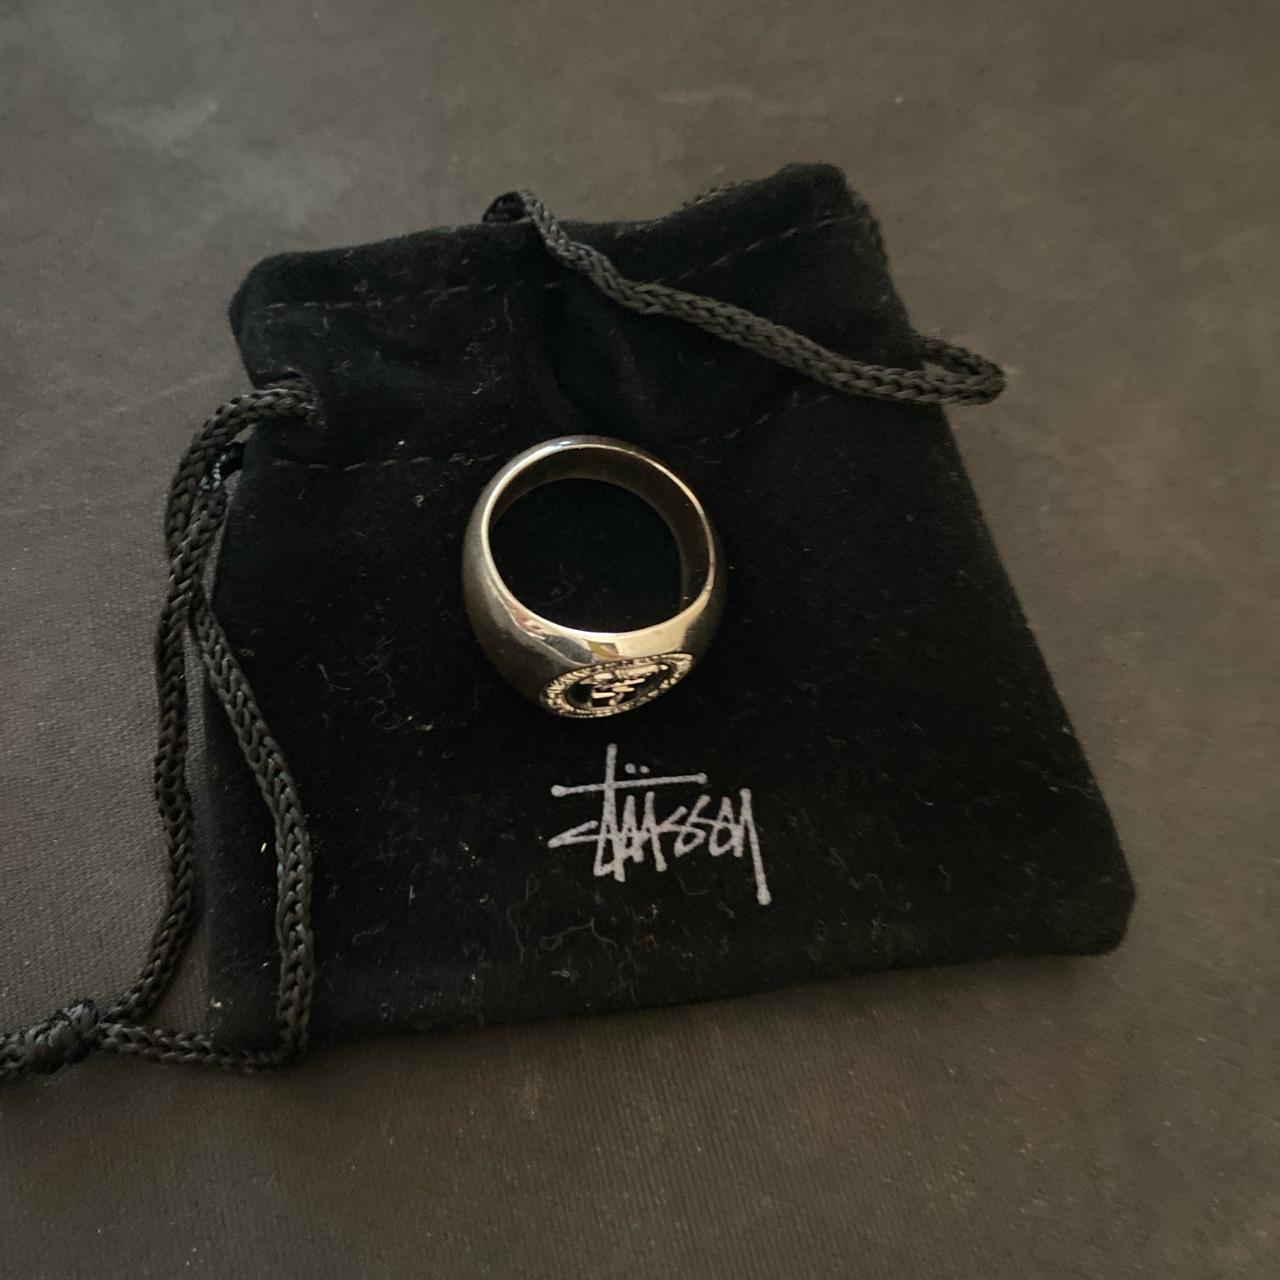 Stussy Ring, Super detailed, Comes with dust